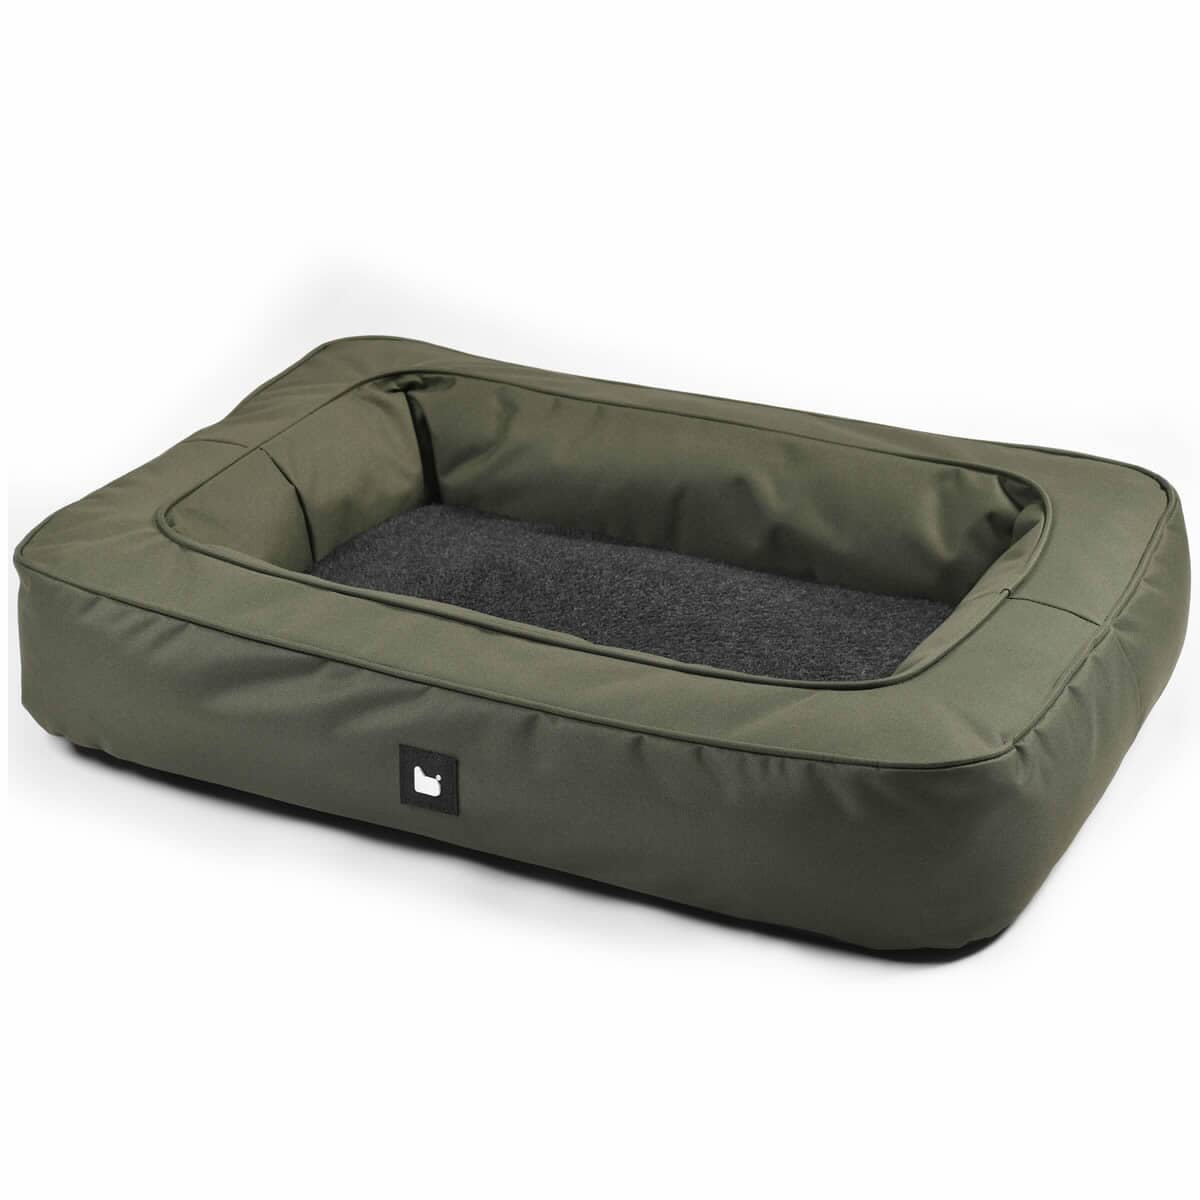 Extreme Lounging B Dog Mighty Dog Bed Forest Green H15 x W80 x L60cm